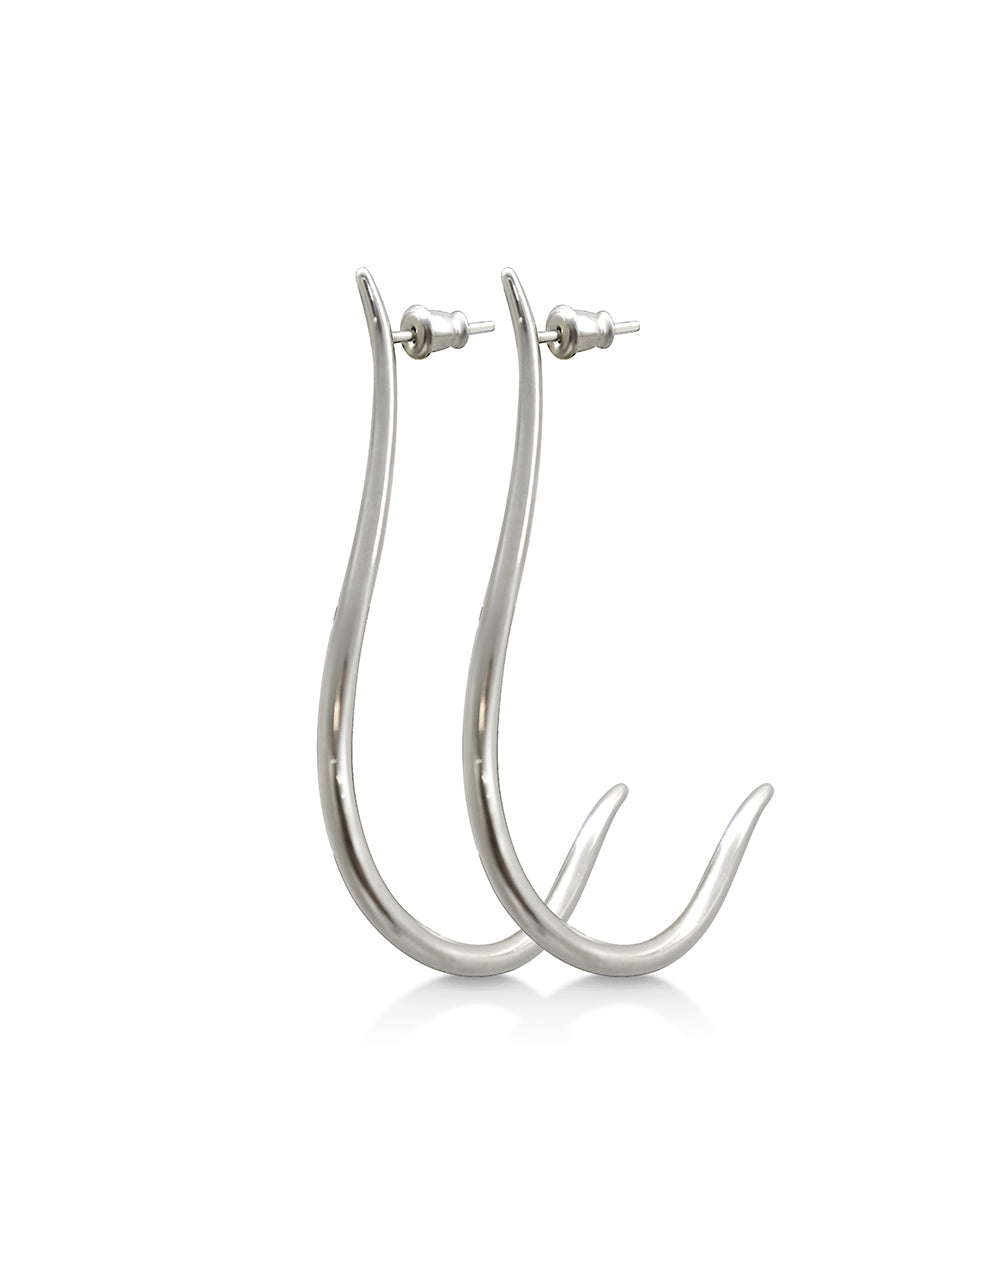 Moghes Curve Silver Earrings